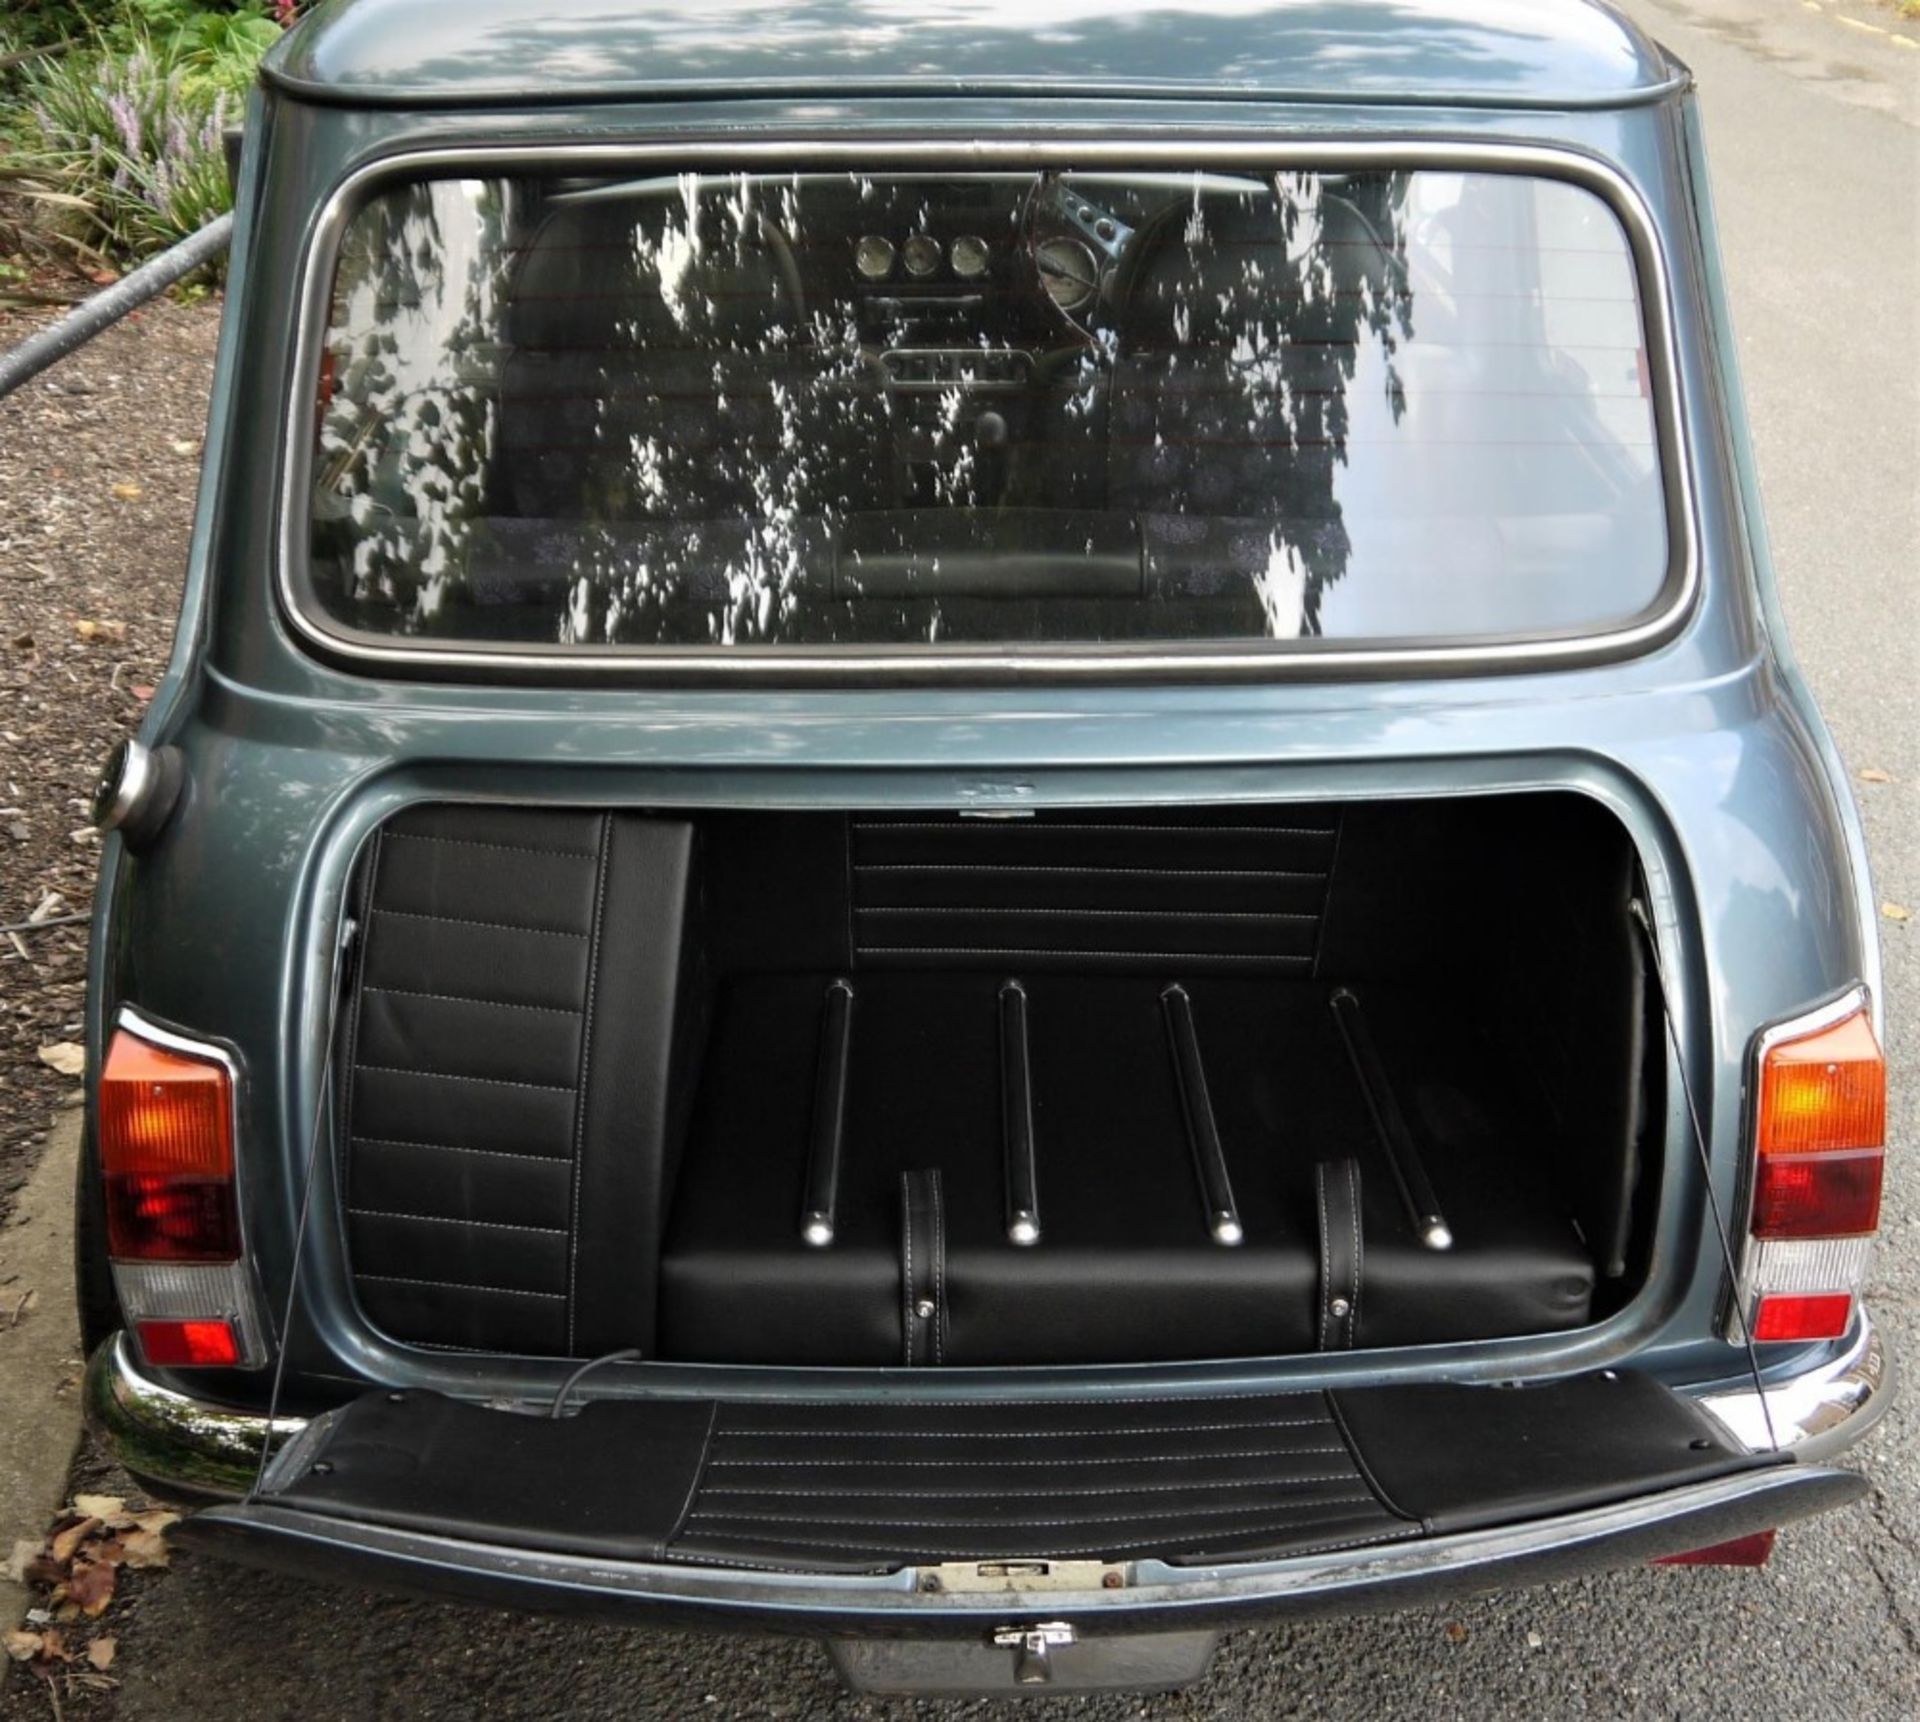 1991 ROVER MINI NEON Registration Number: J774 NWD Recorded Mileage: 58,000 miles Chassis Number: - Image 22 of 24